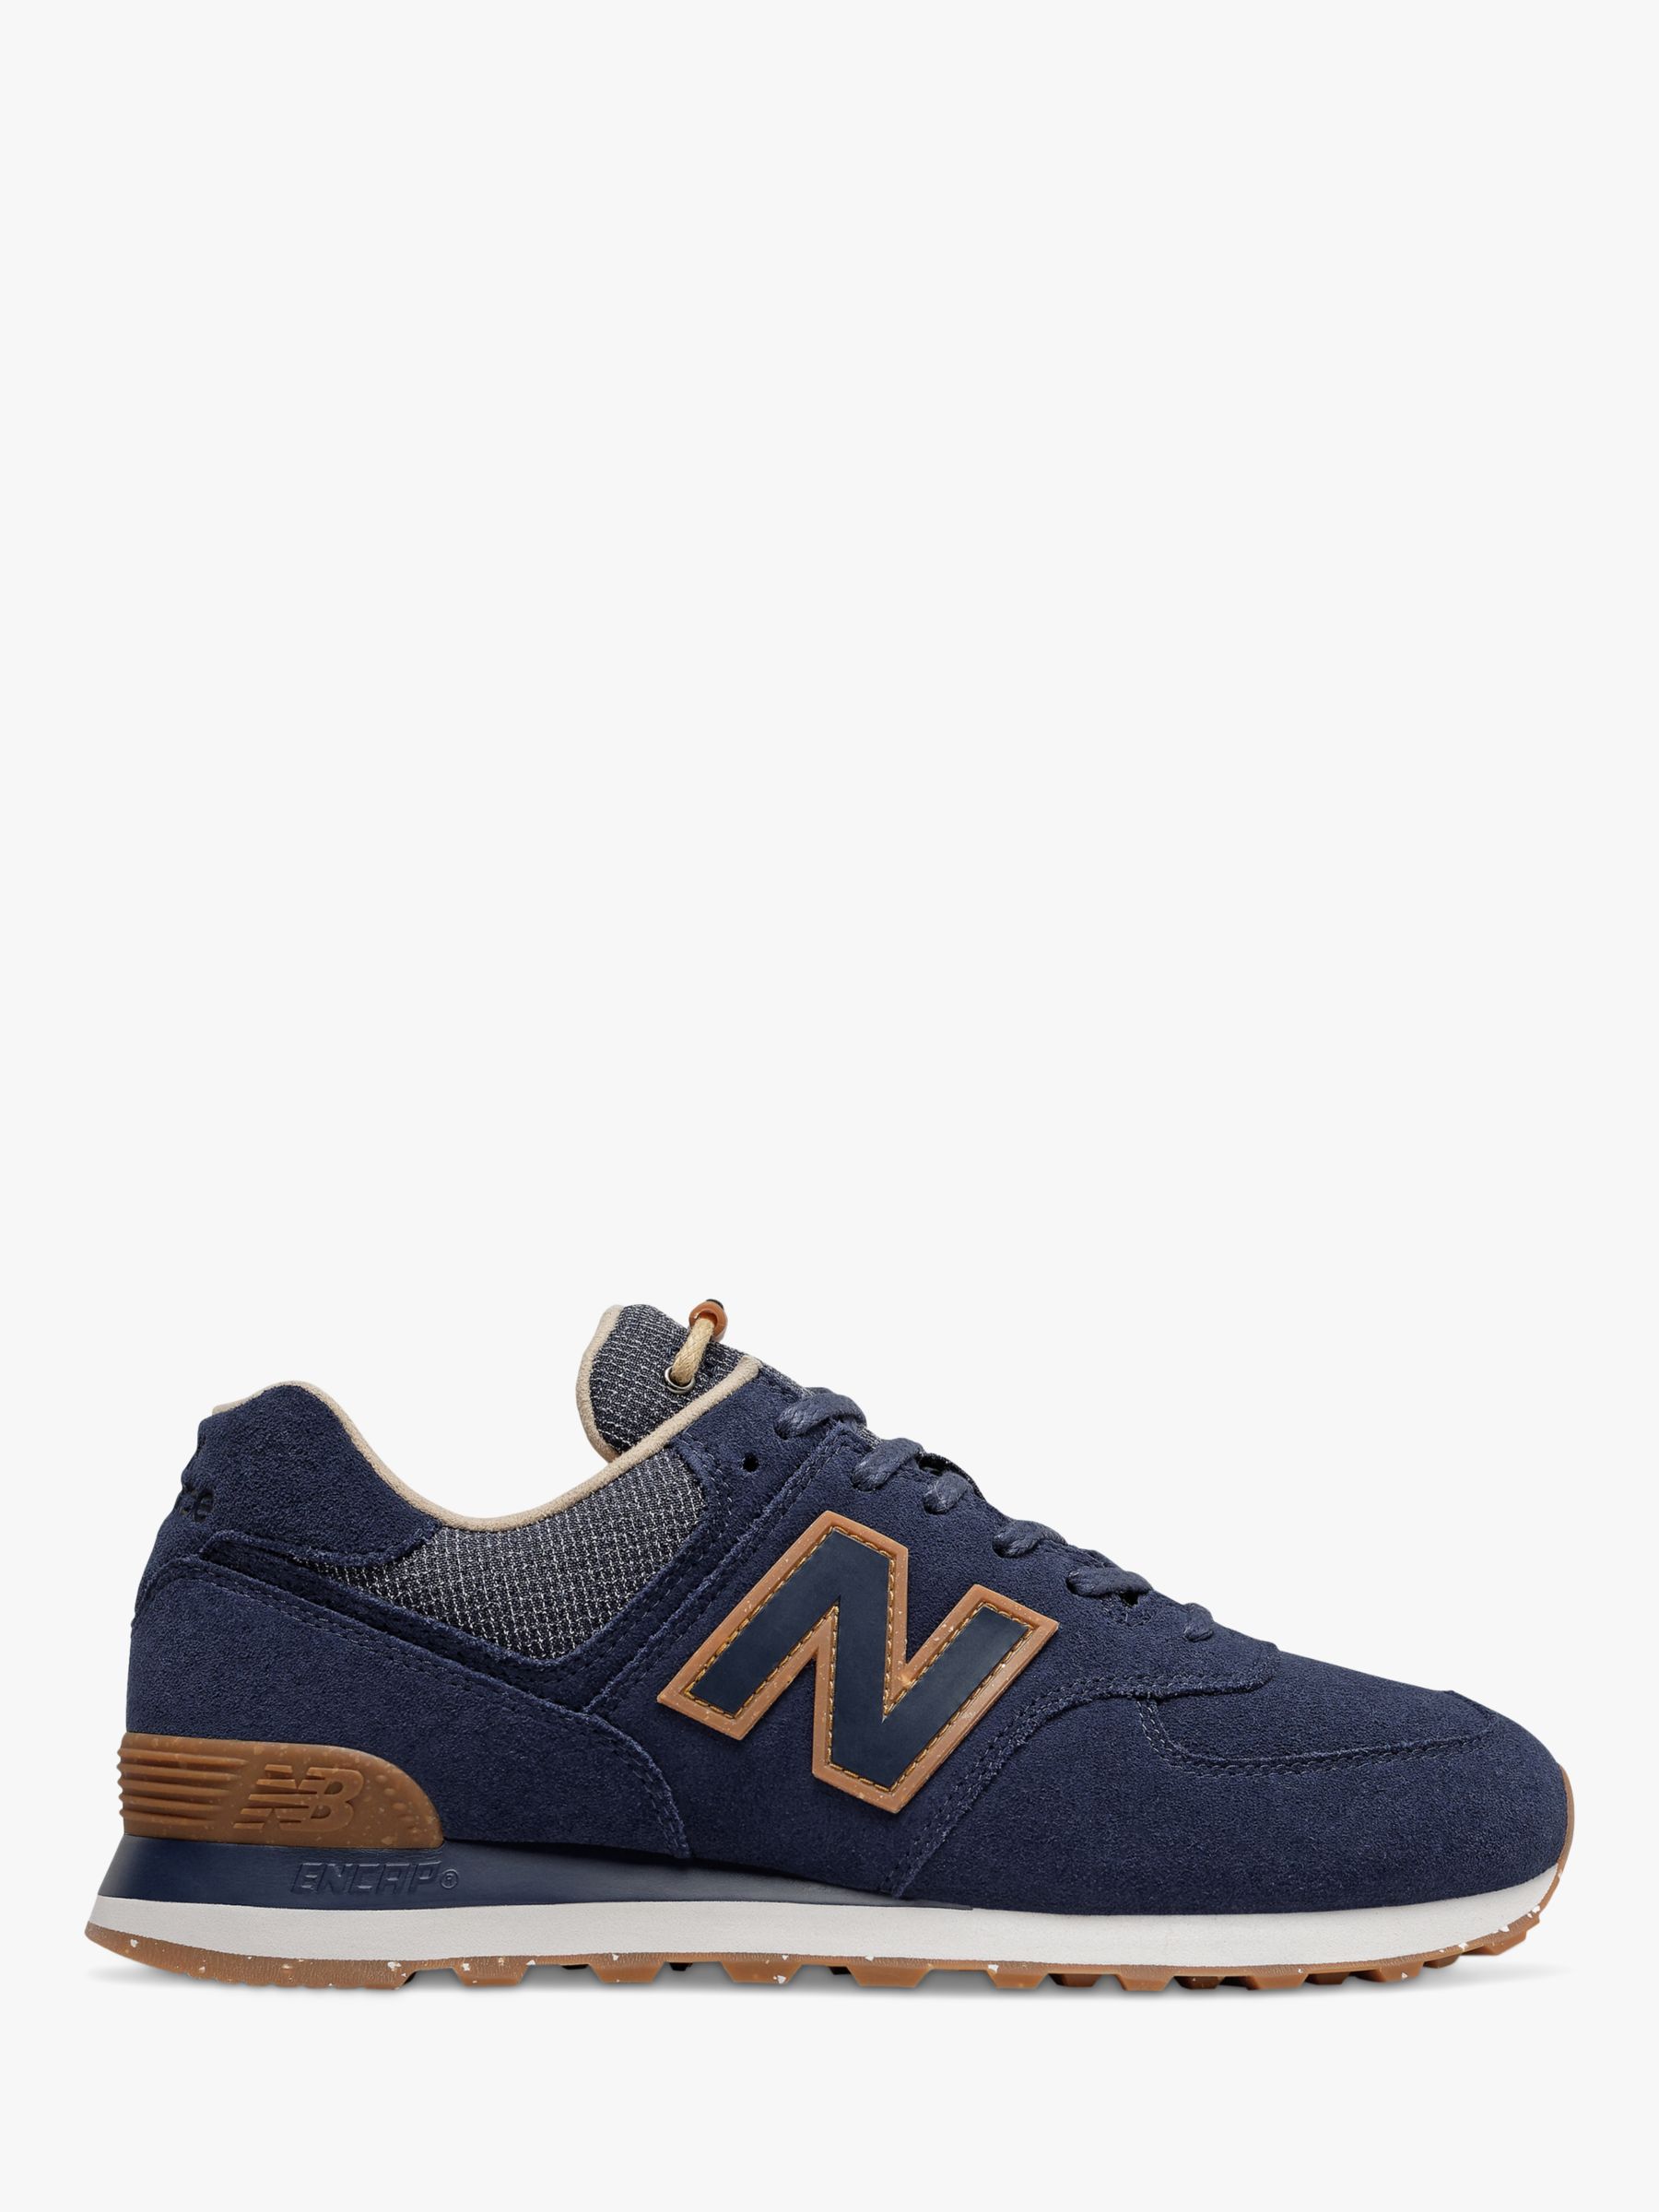 New Balance 574 Suede Trainers, Blue Brown at John Lewis & Partners